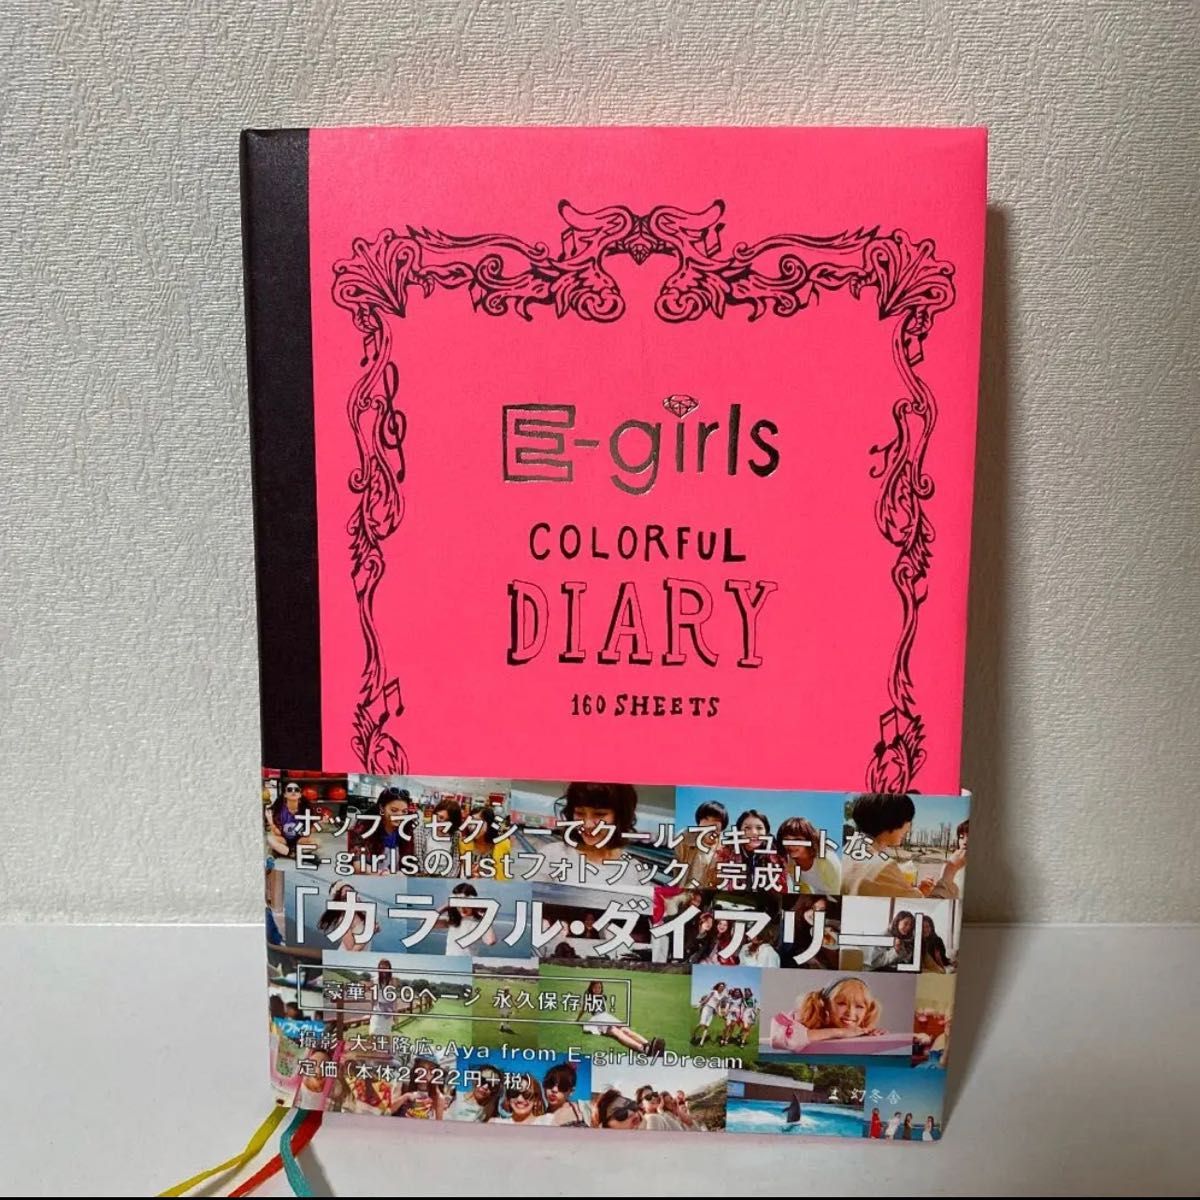 E-girls COLORFUL DIARY - 国内アーティスト